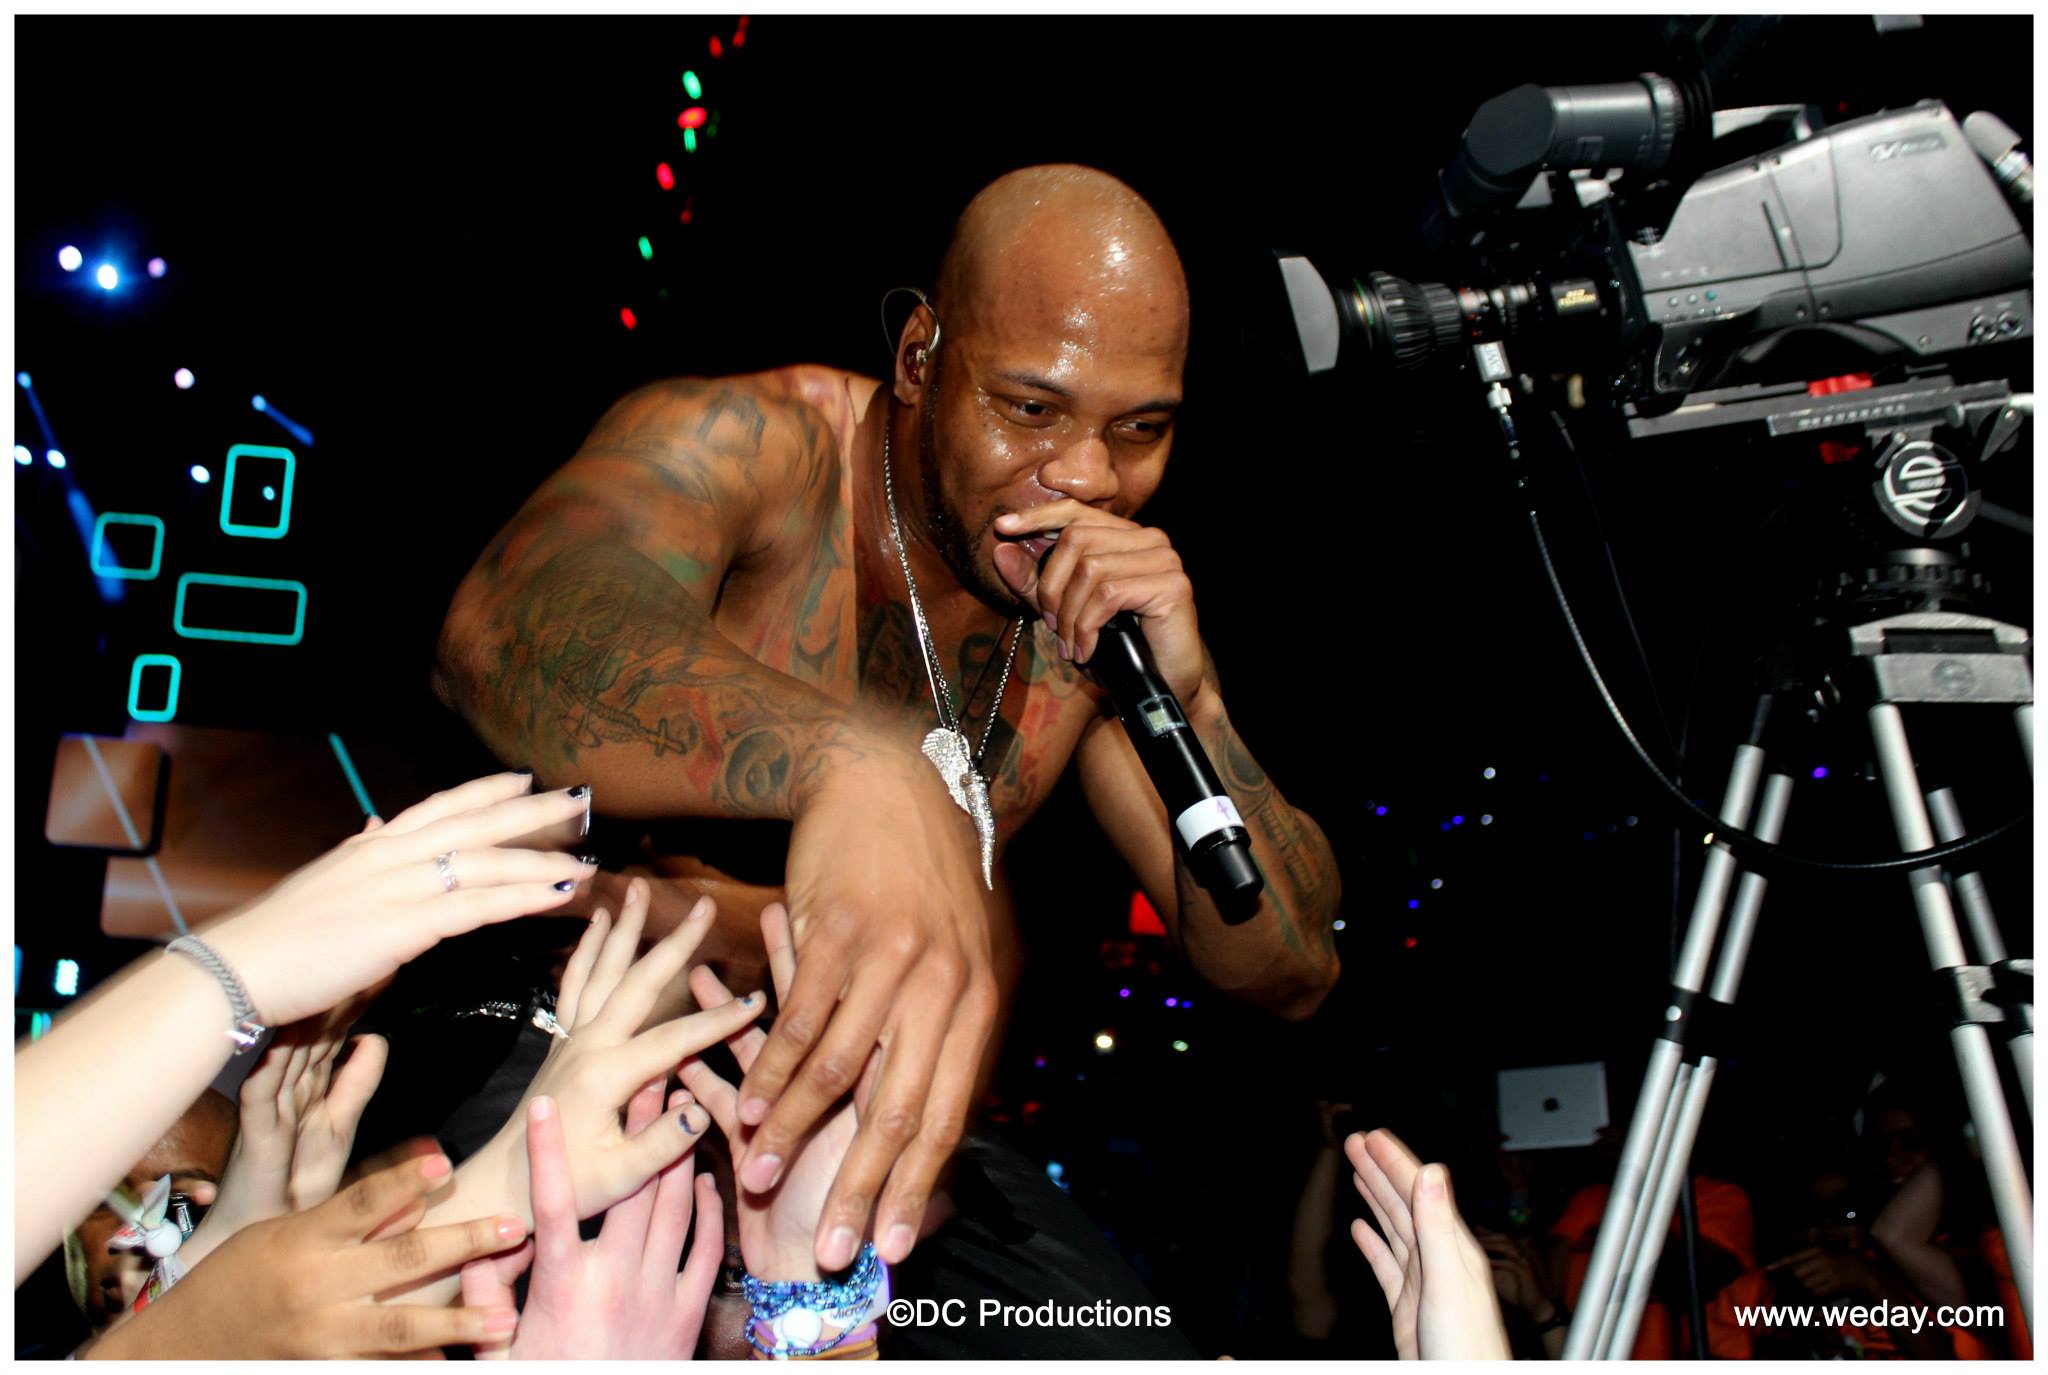 Flo Rida Rocks the house at “WE DAY” Seattle